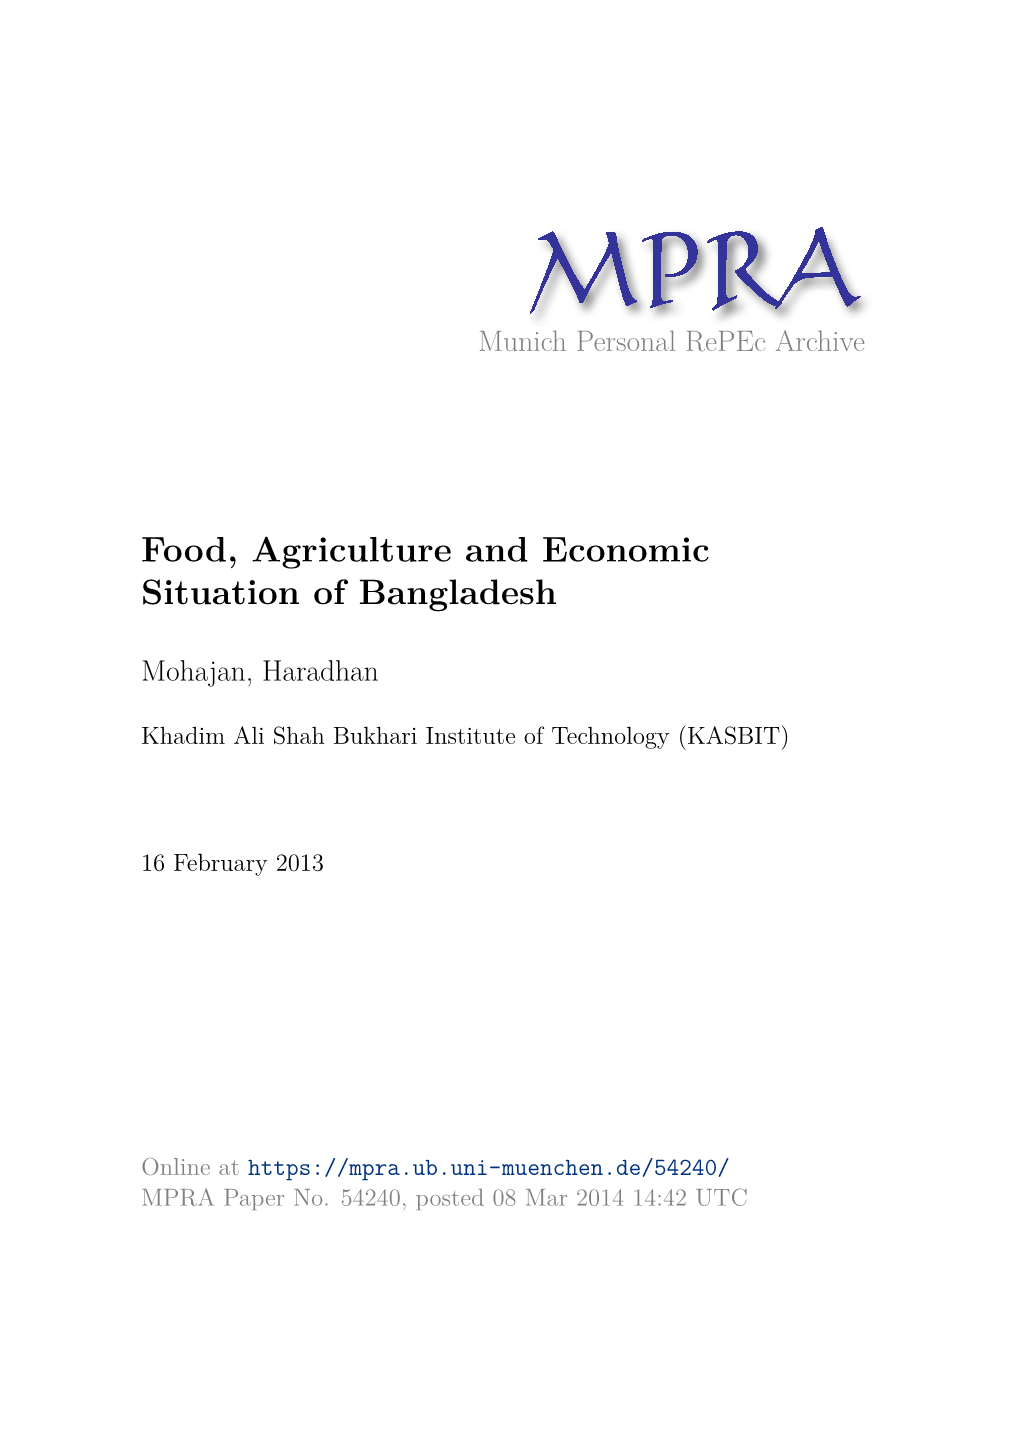 Food, Agriculture and Economic Situation of Bangladesh